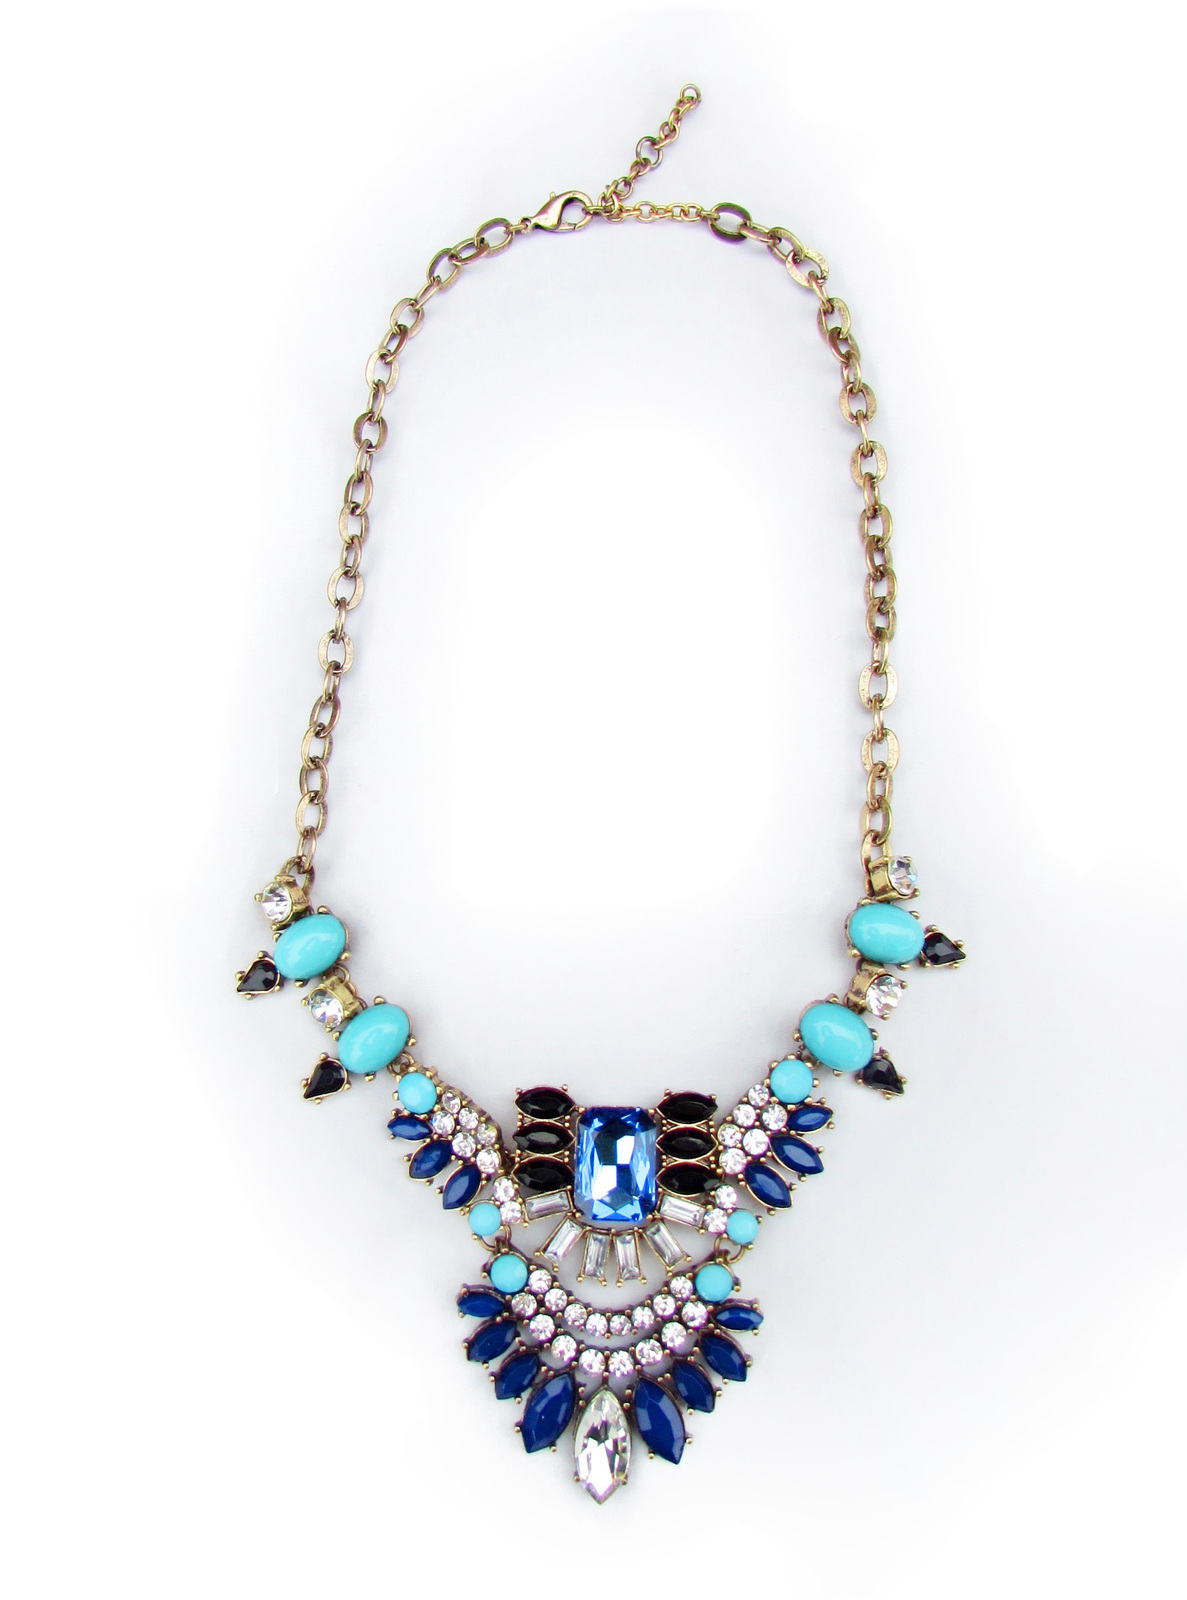 J. Crew Style Blue Crystal Fashion Statement Necklace - Necklaces ...